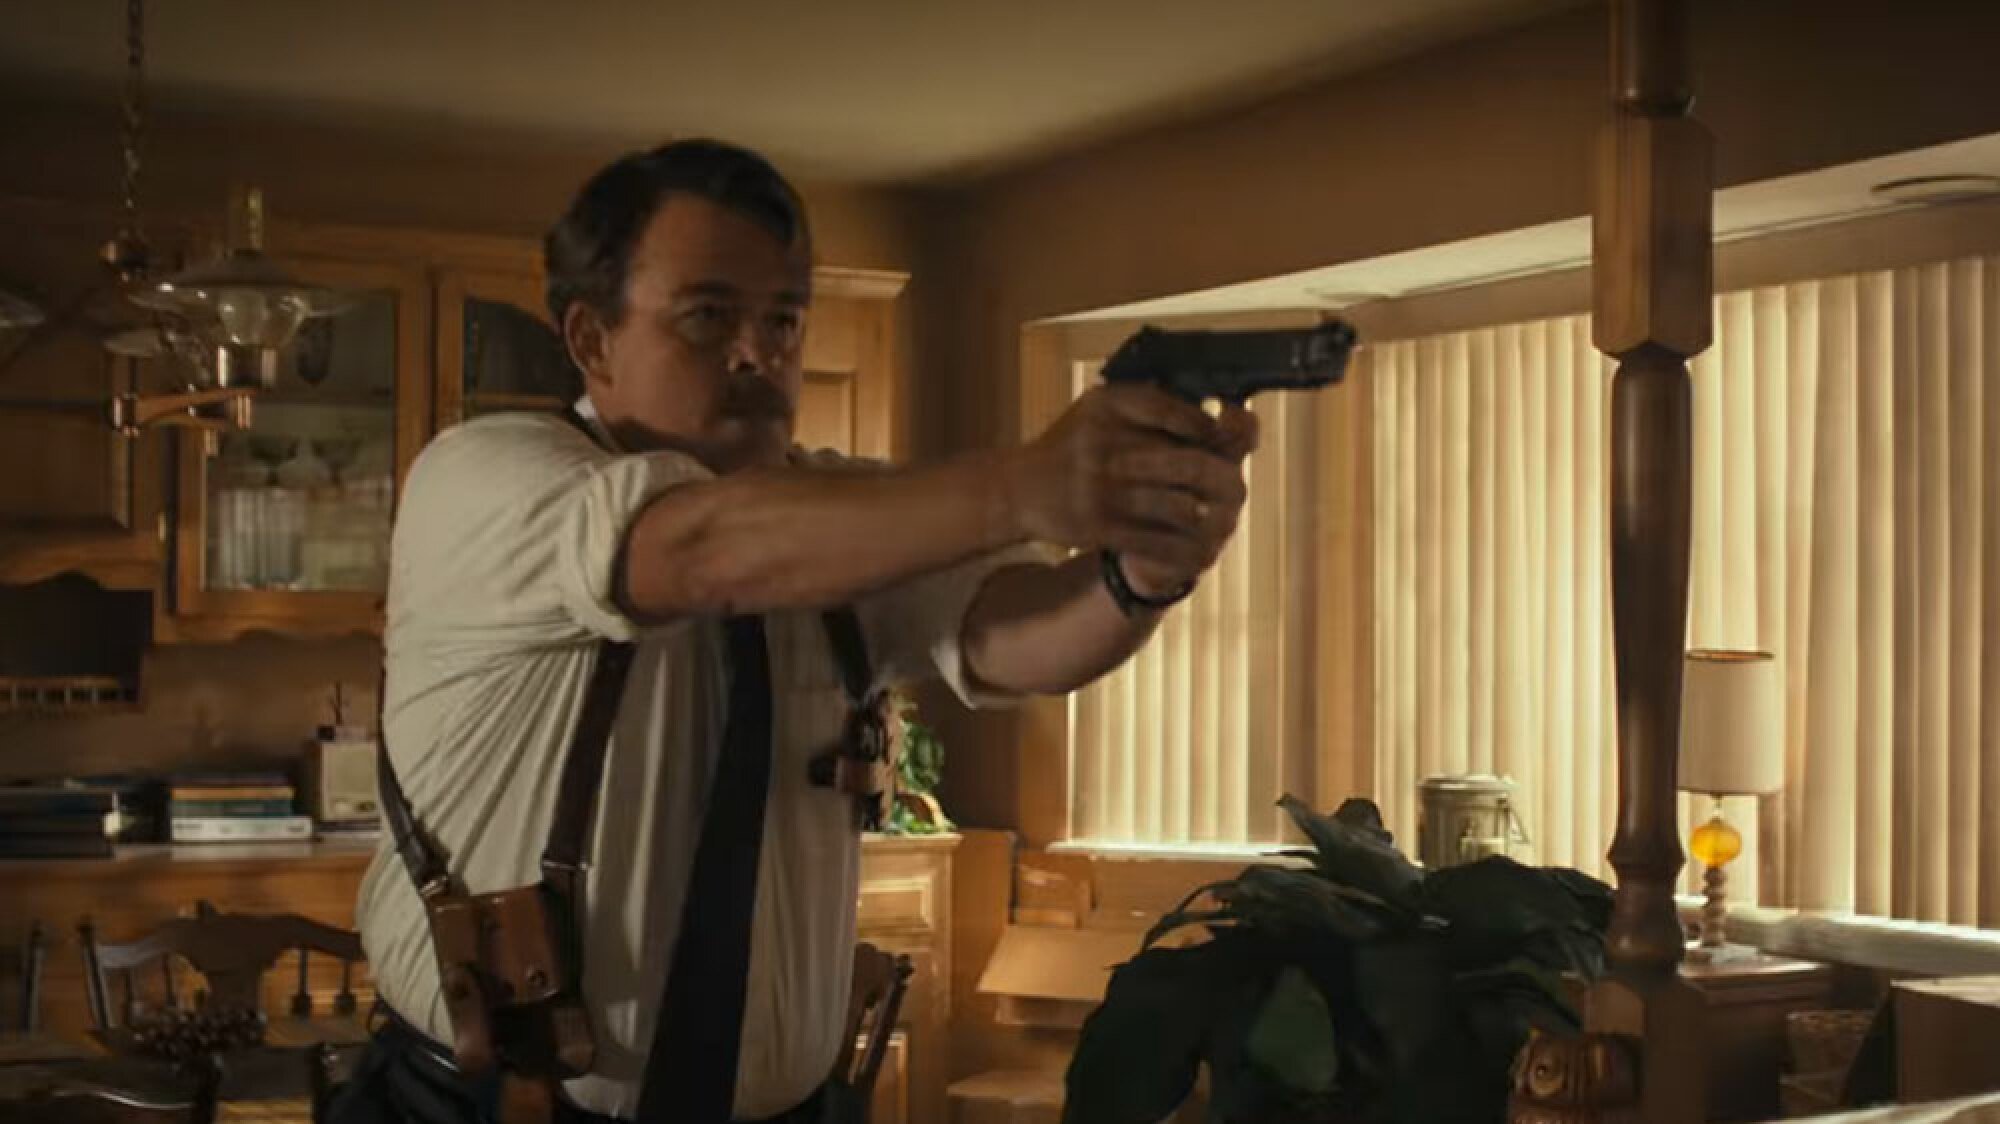 A man in a shirt and tie points a gun